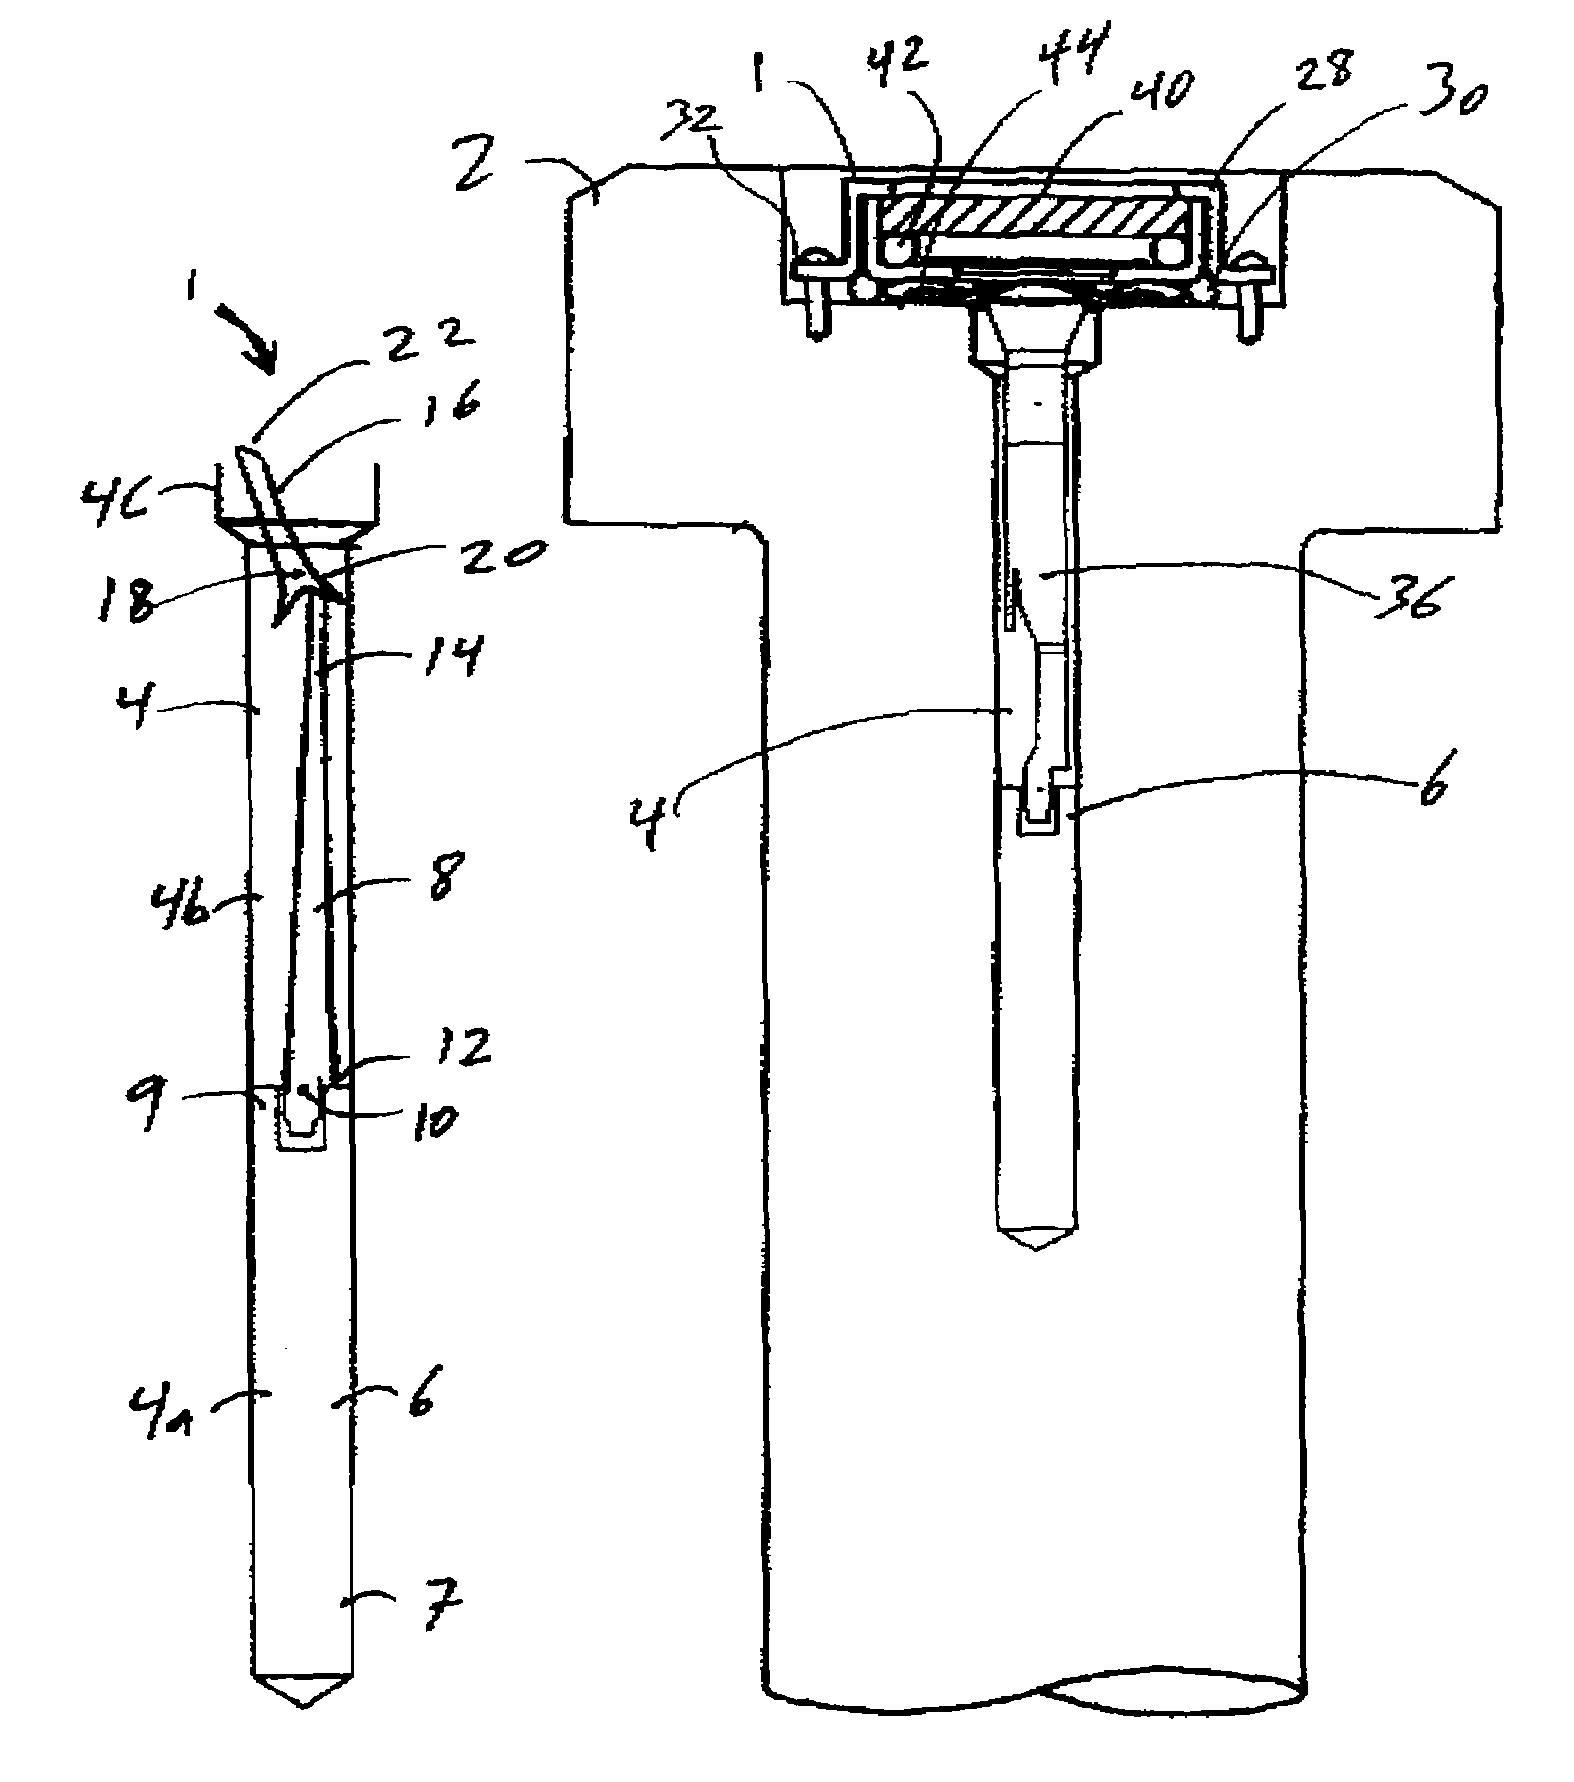 Method and apparatus for indicating a load